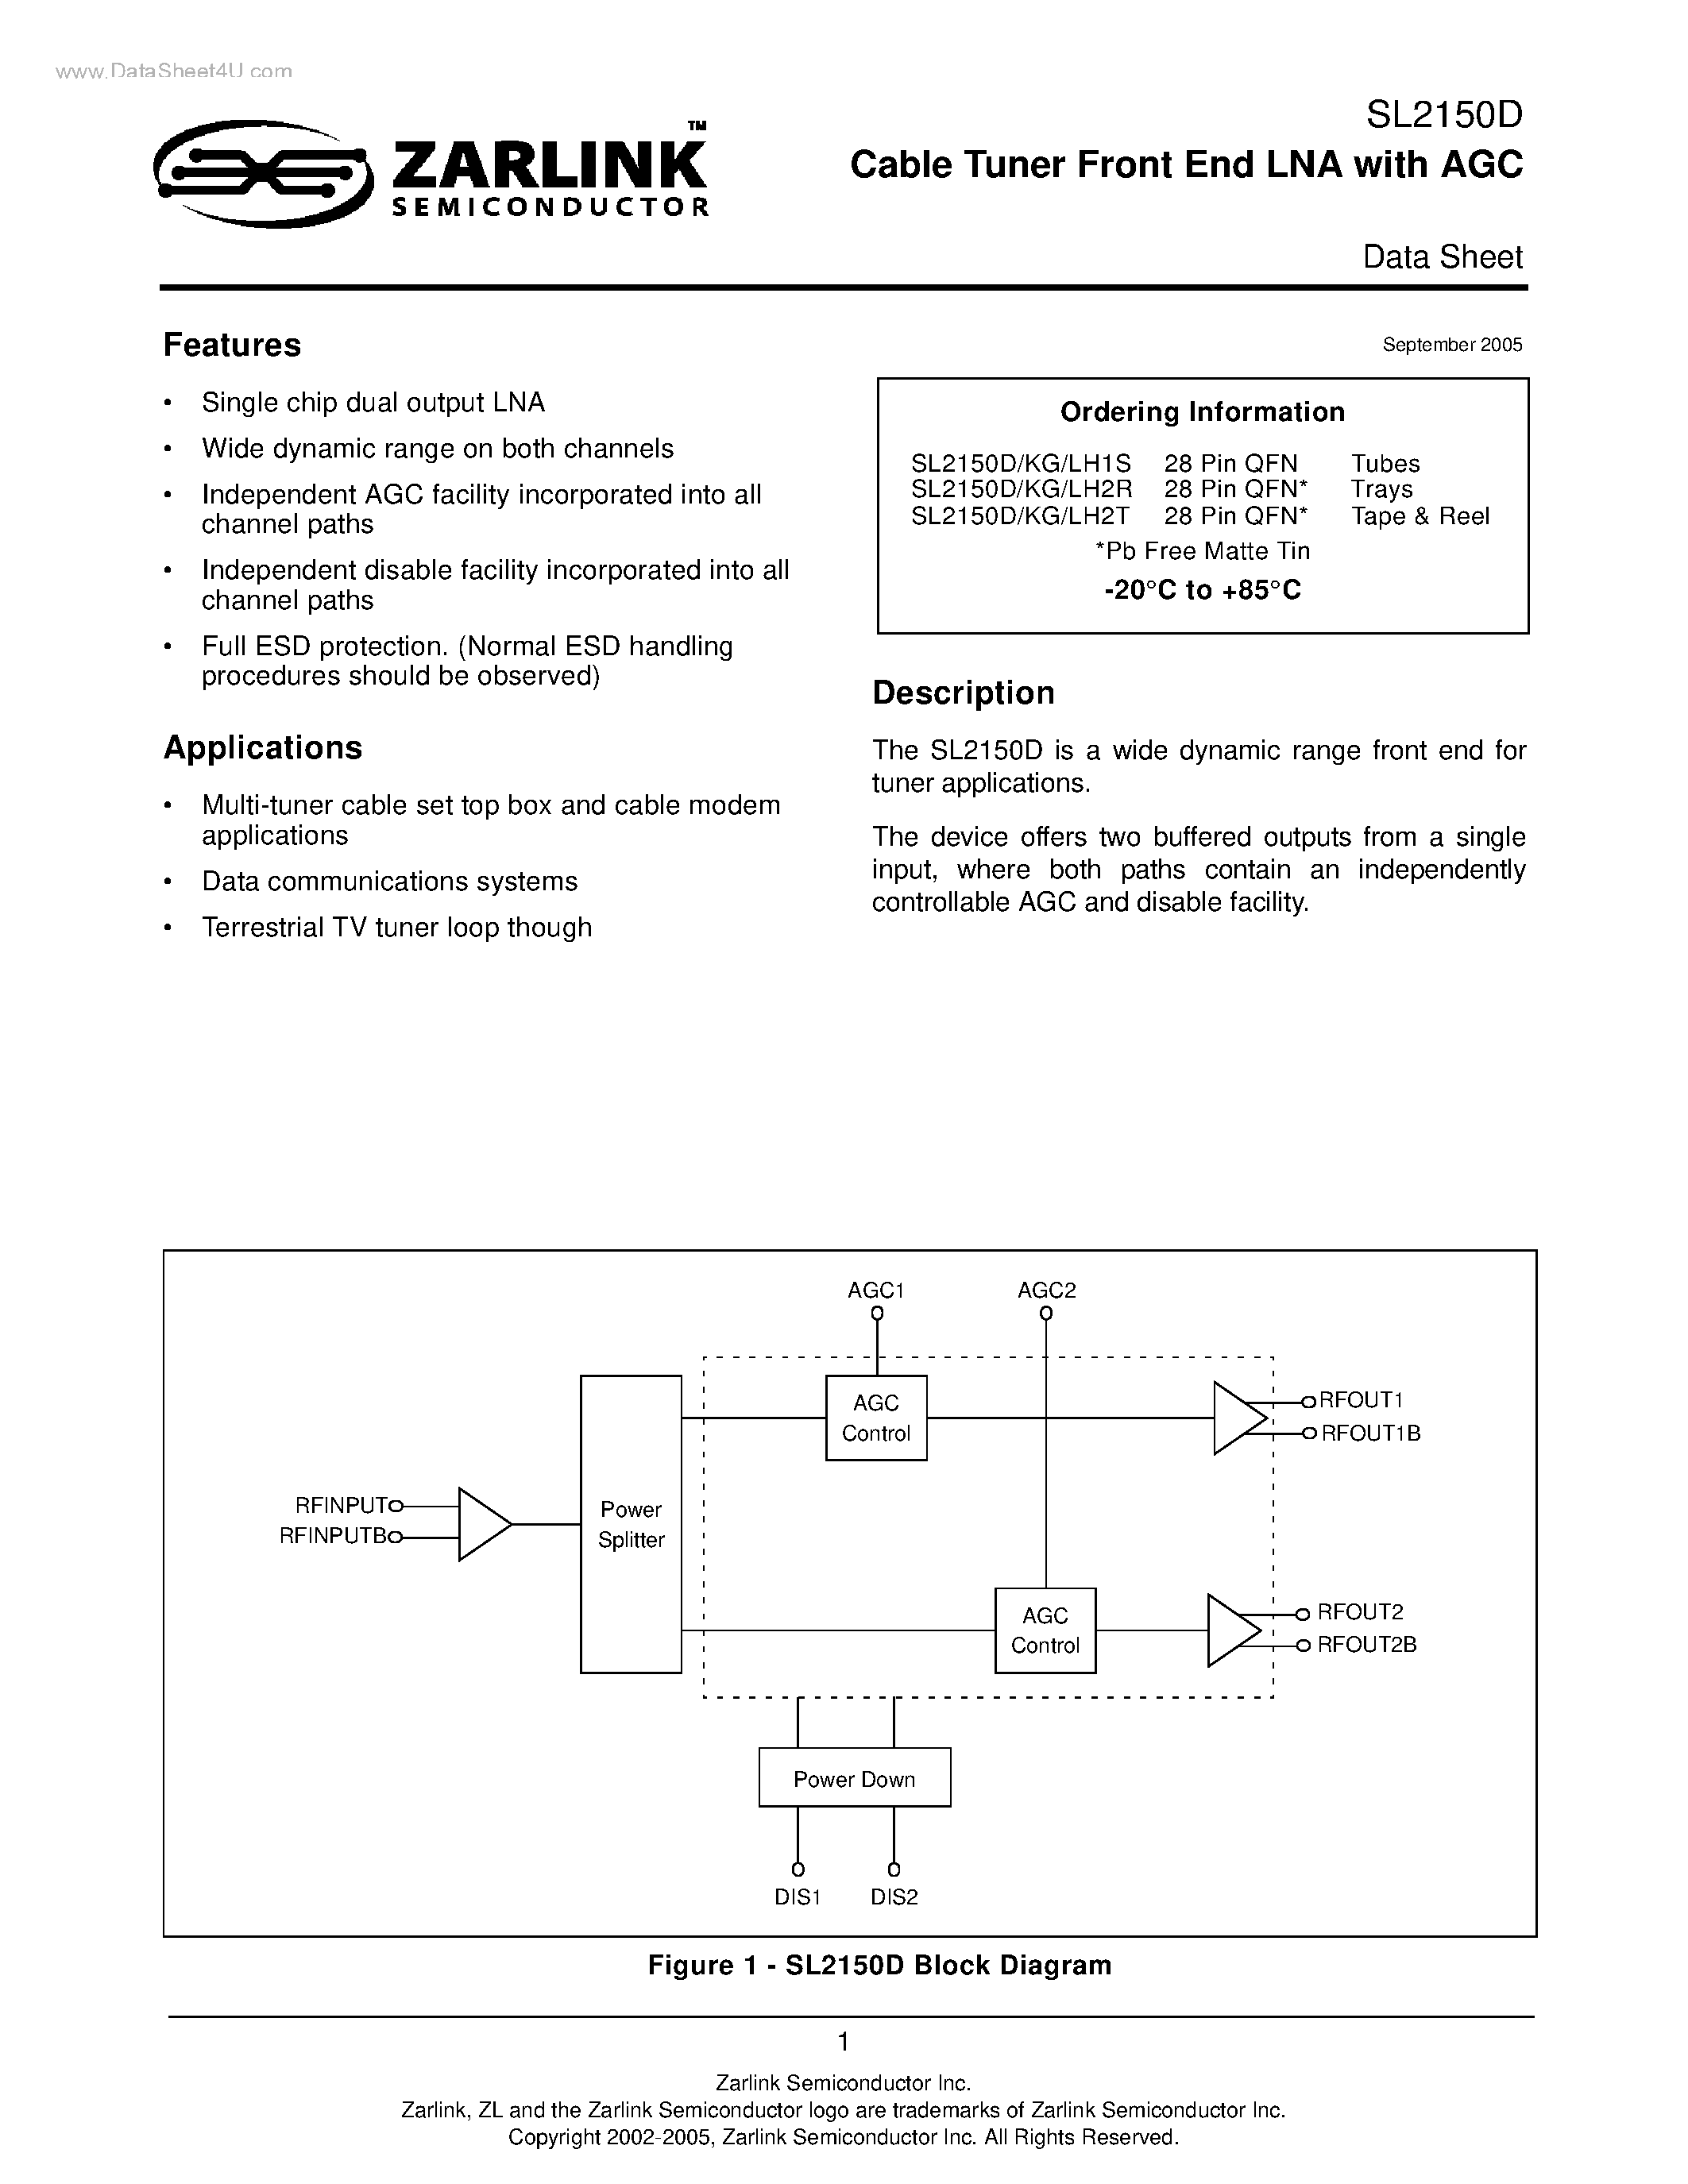 Datasheet SL2150D - Cable Tuner Front End LNA page 1